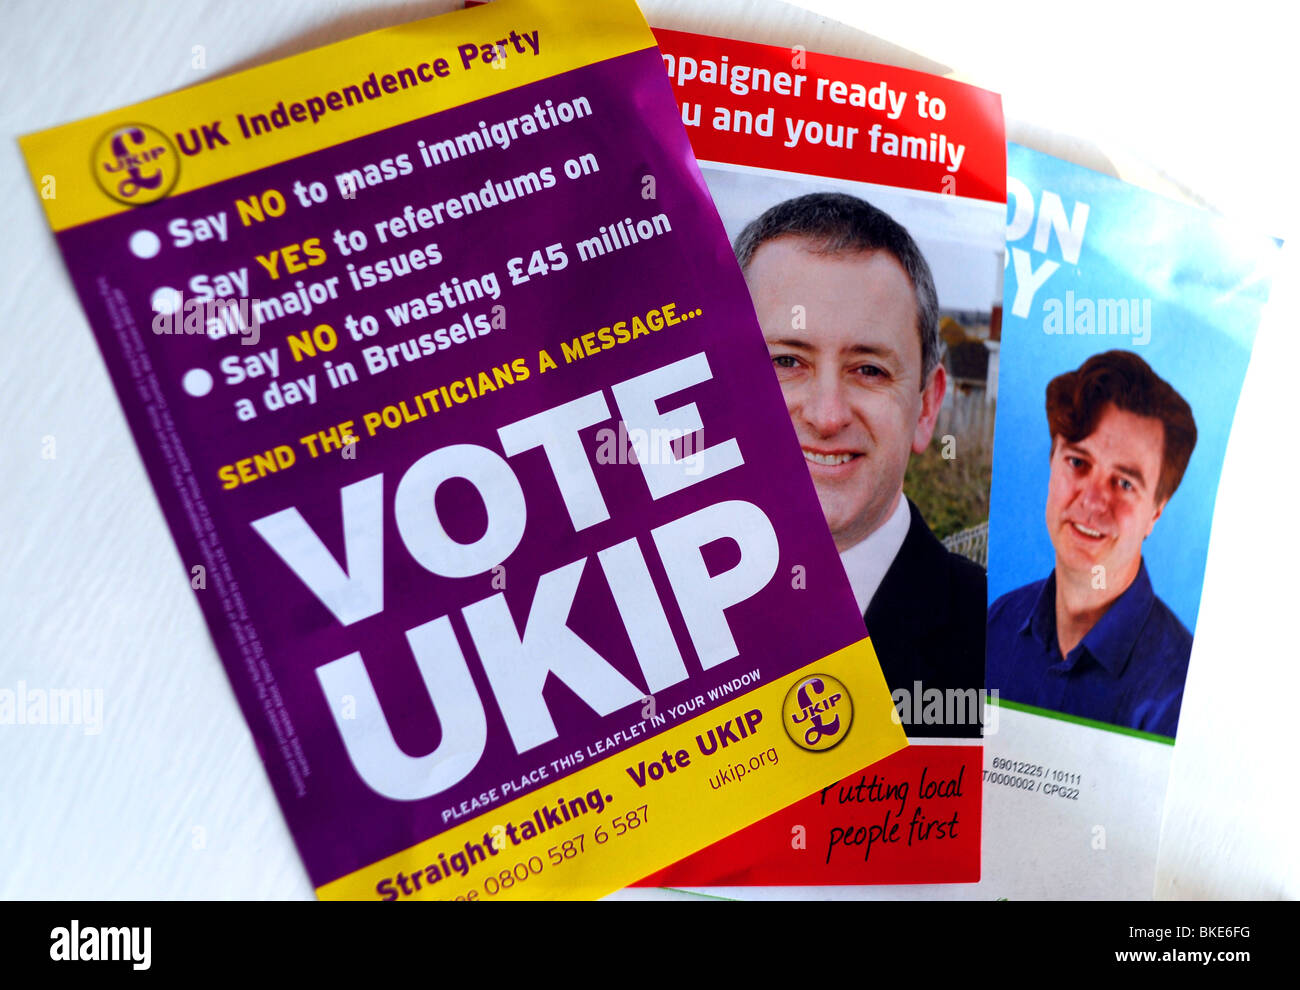 British General Election 2010 leaflets for Labour Conservative and UKIP UK political parties Stock Photo